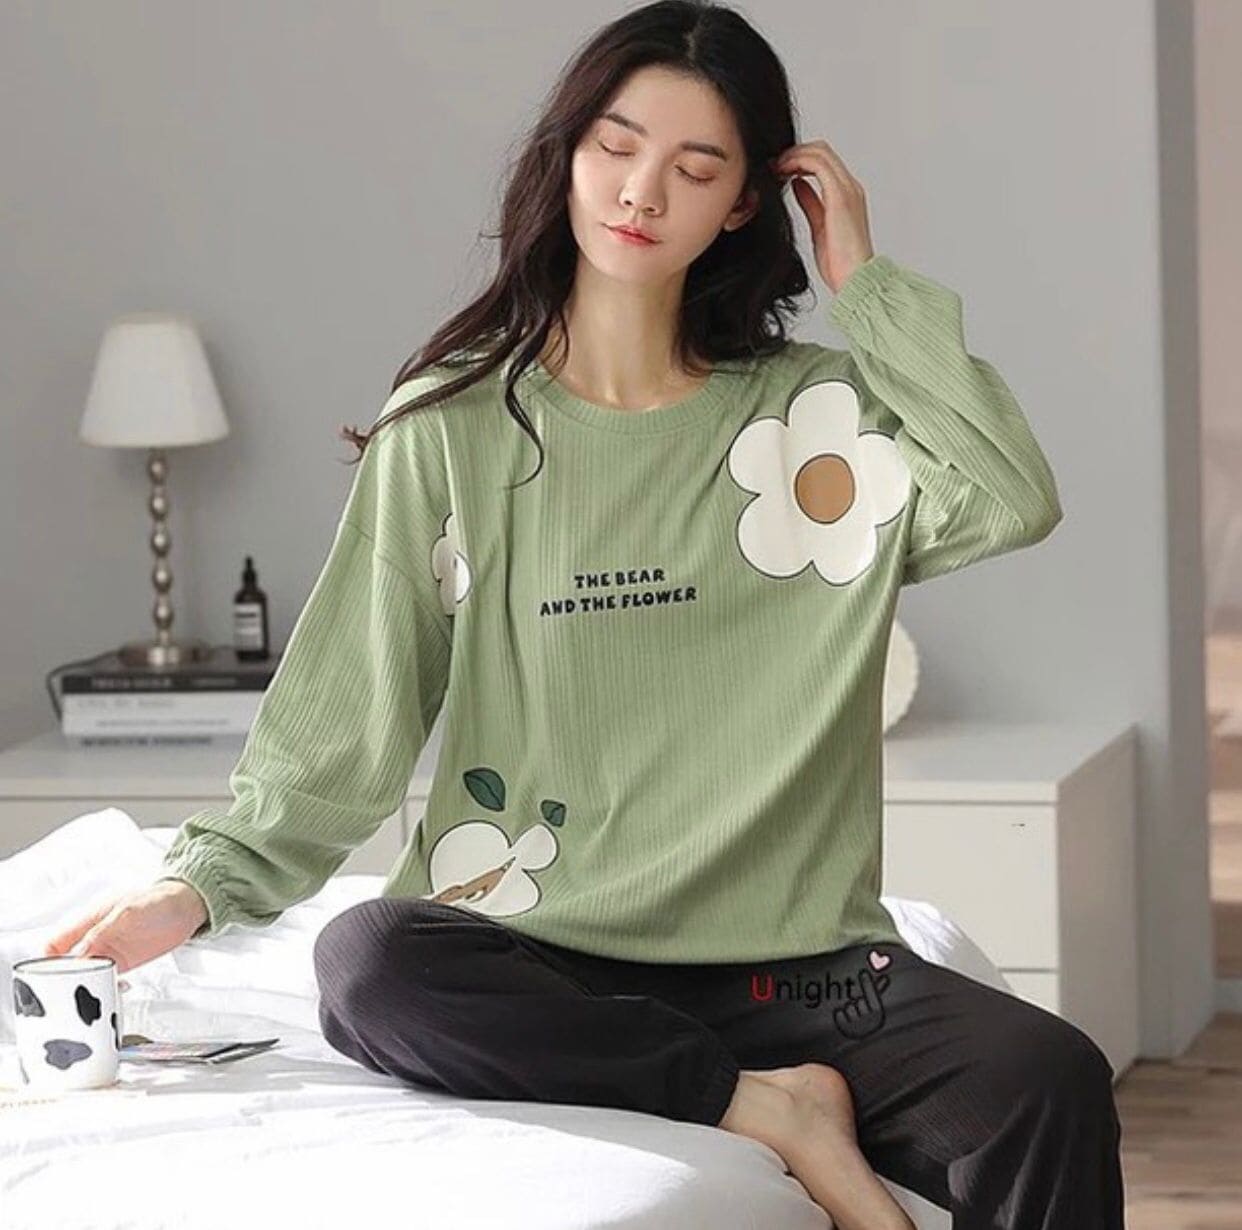 The Beet And The Flower Half Sleeves Women's Night Wear